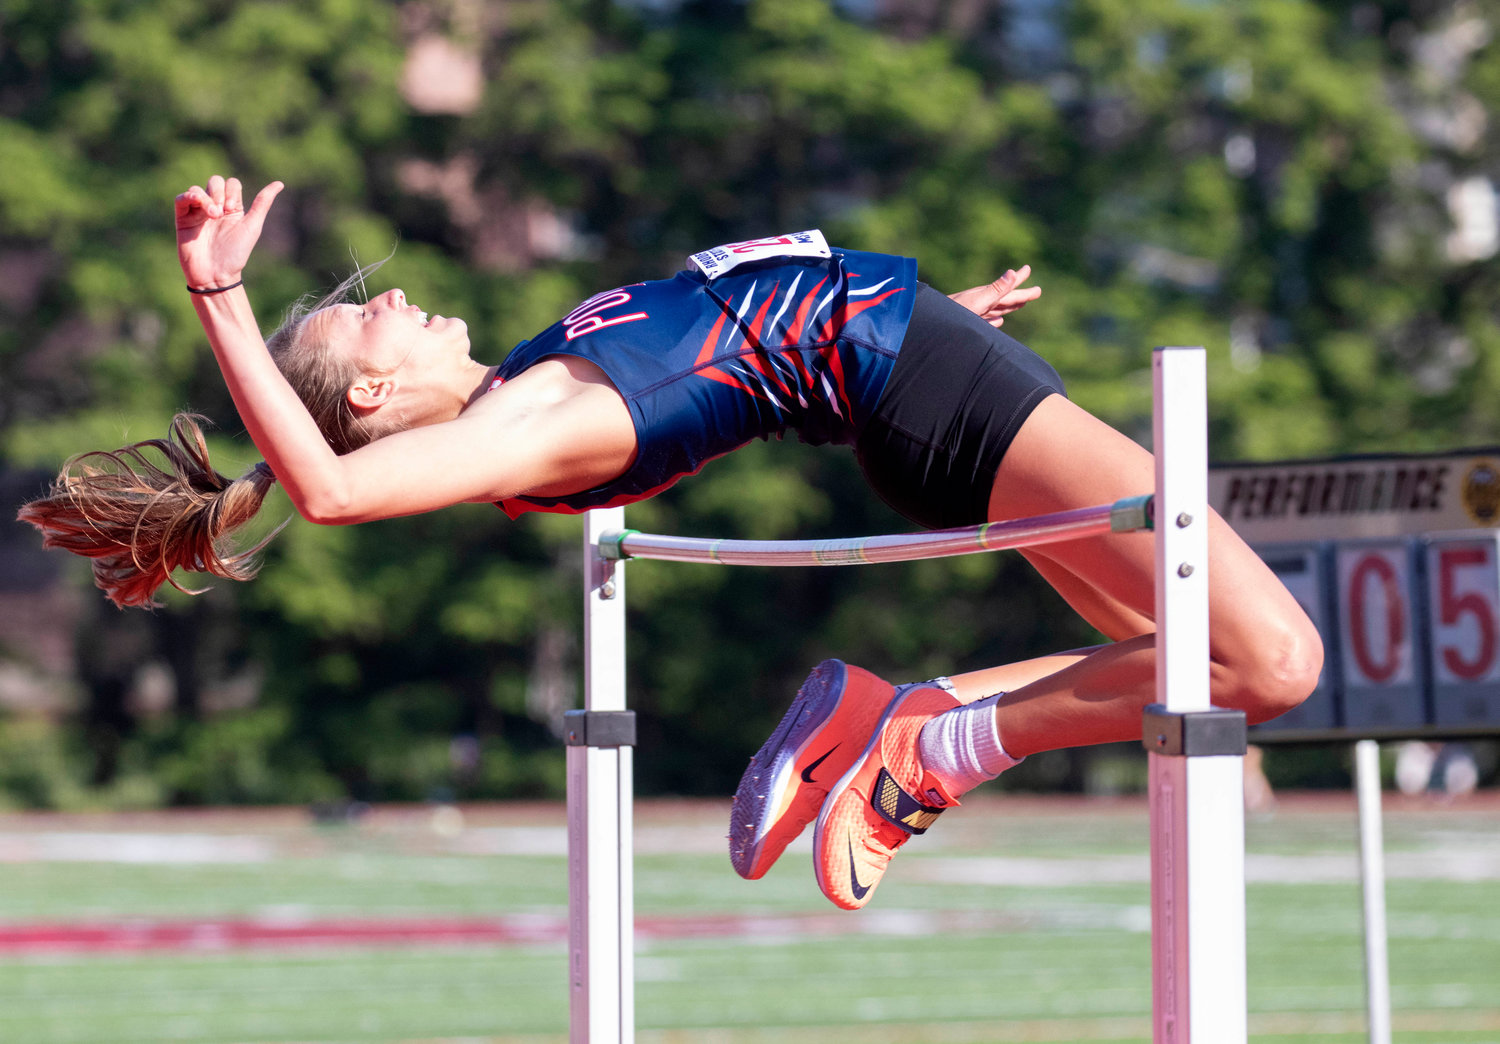 Portsmouth High’s Morgan Casey won the gold medal in the high jump at the state outdoor track and field championships held Saturday at Brown University.